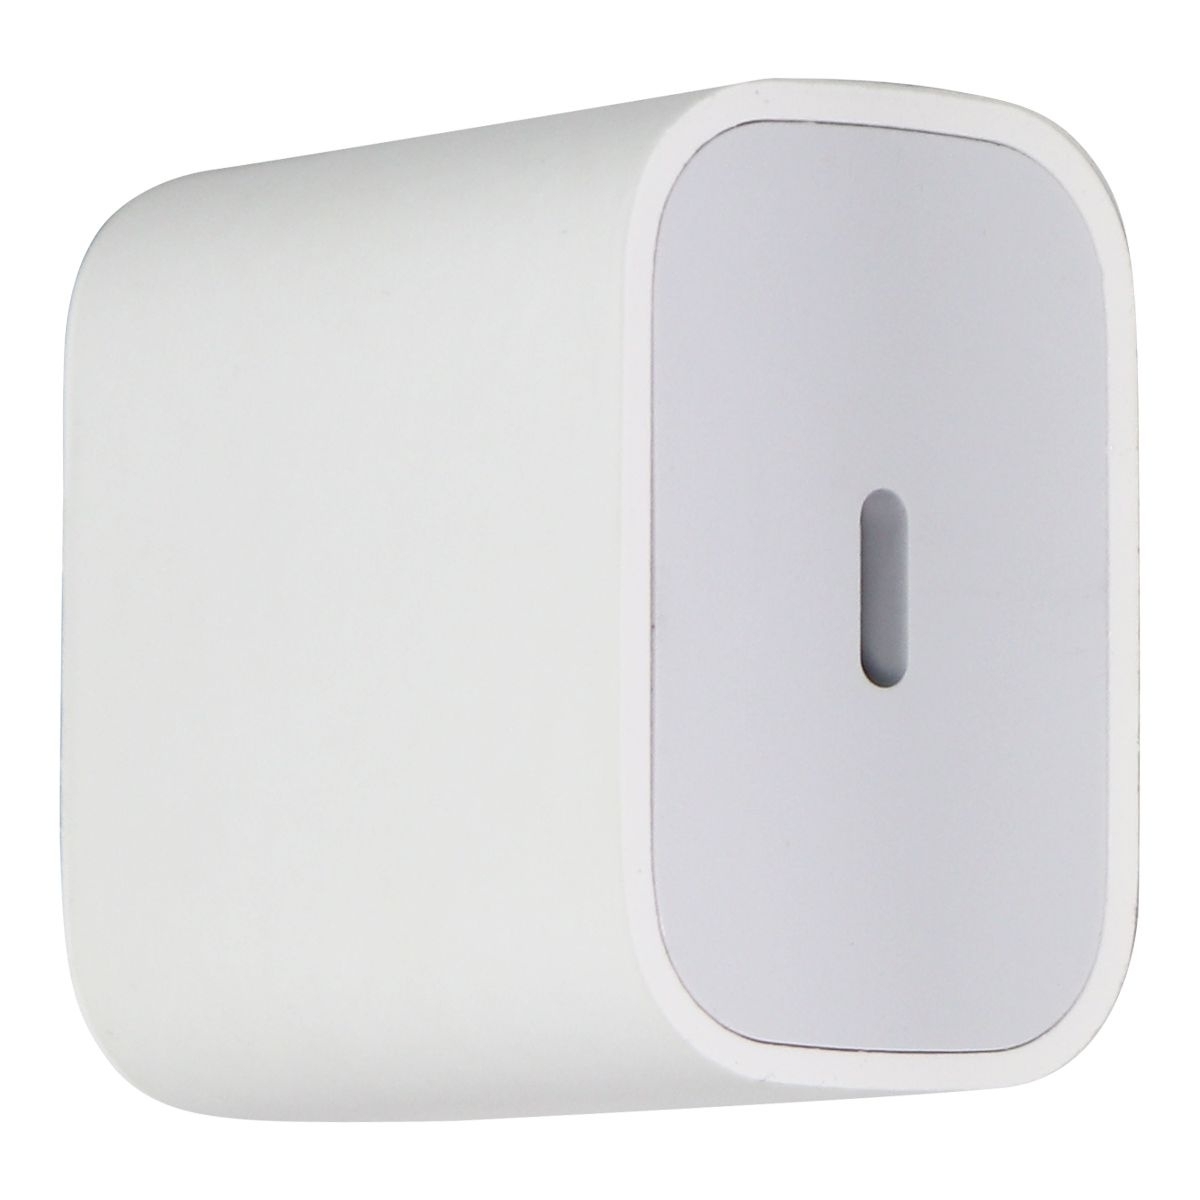 Apple 20-Watt (USB-C) Wall Charger Travel Adapter - White (A2305)